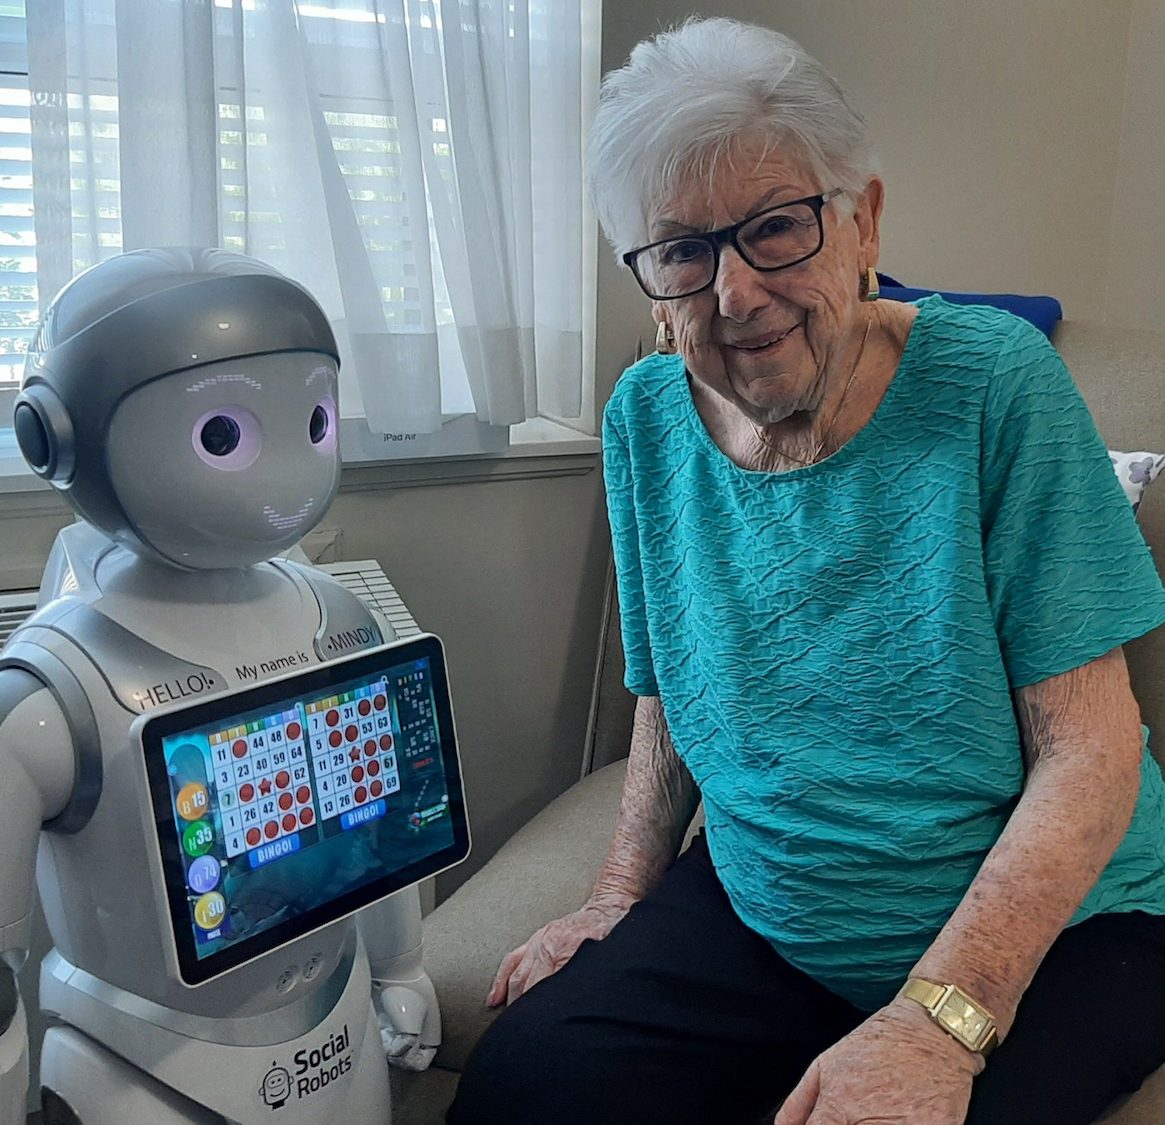 Mindy, robot, with bingo game on chest tablet; standing beside older adult smiling while playing the game.